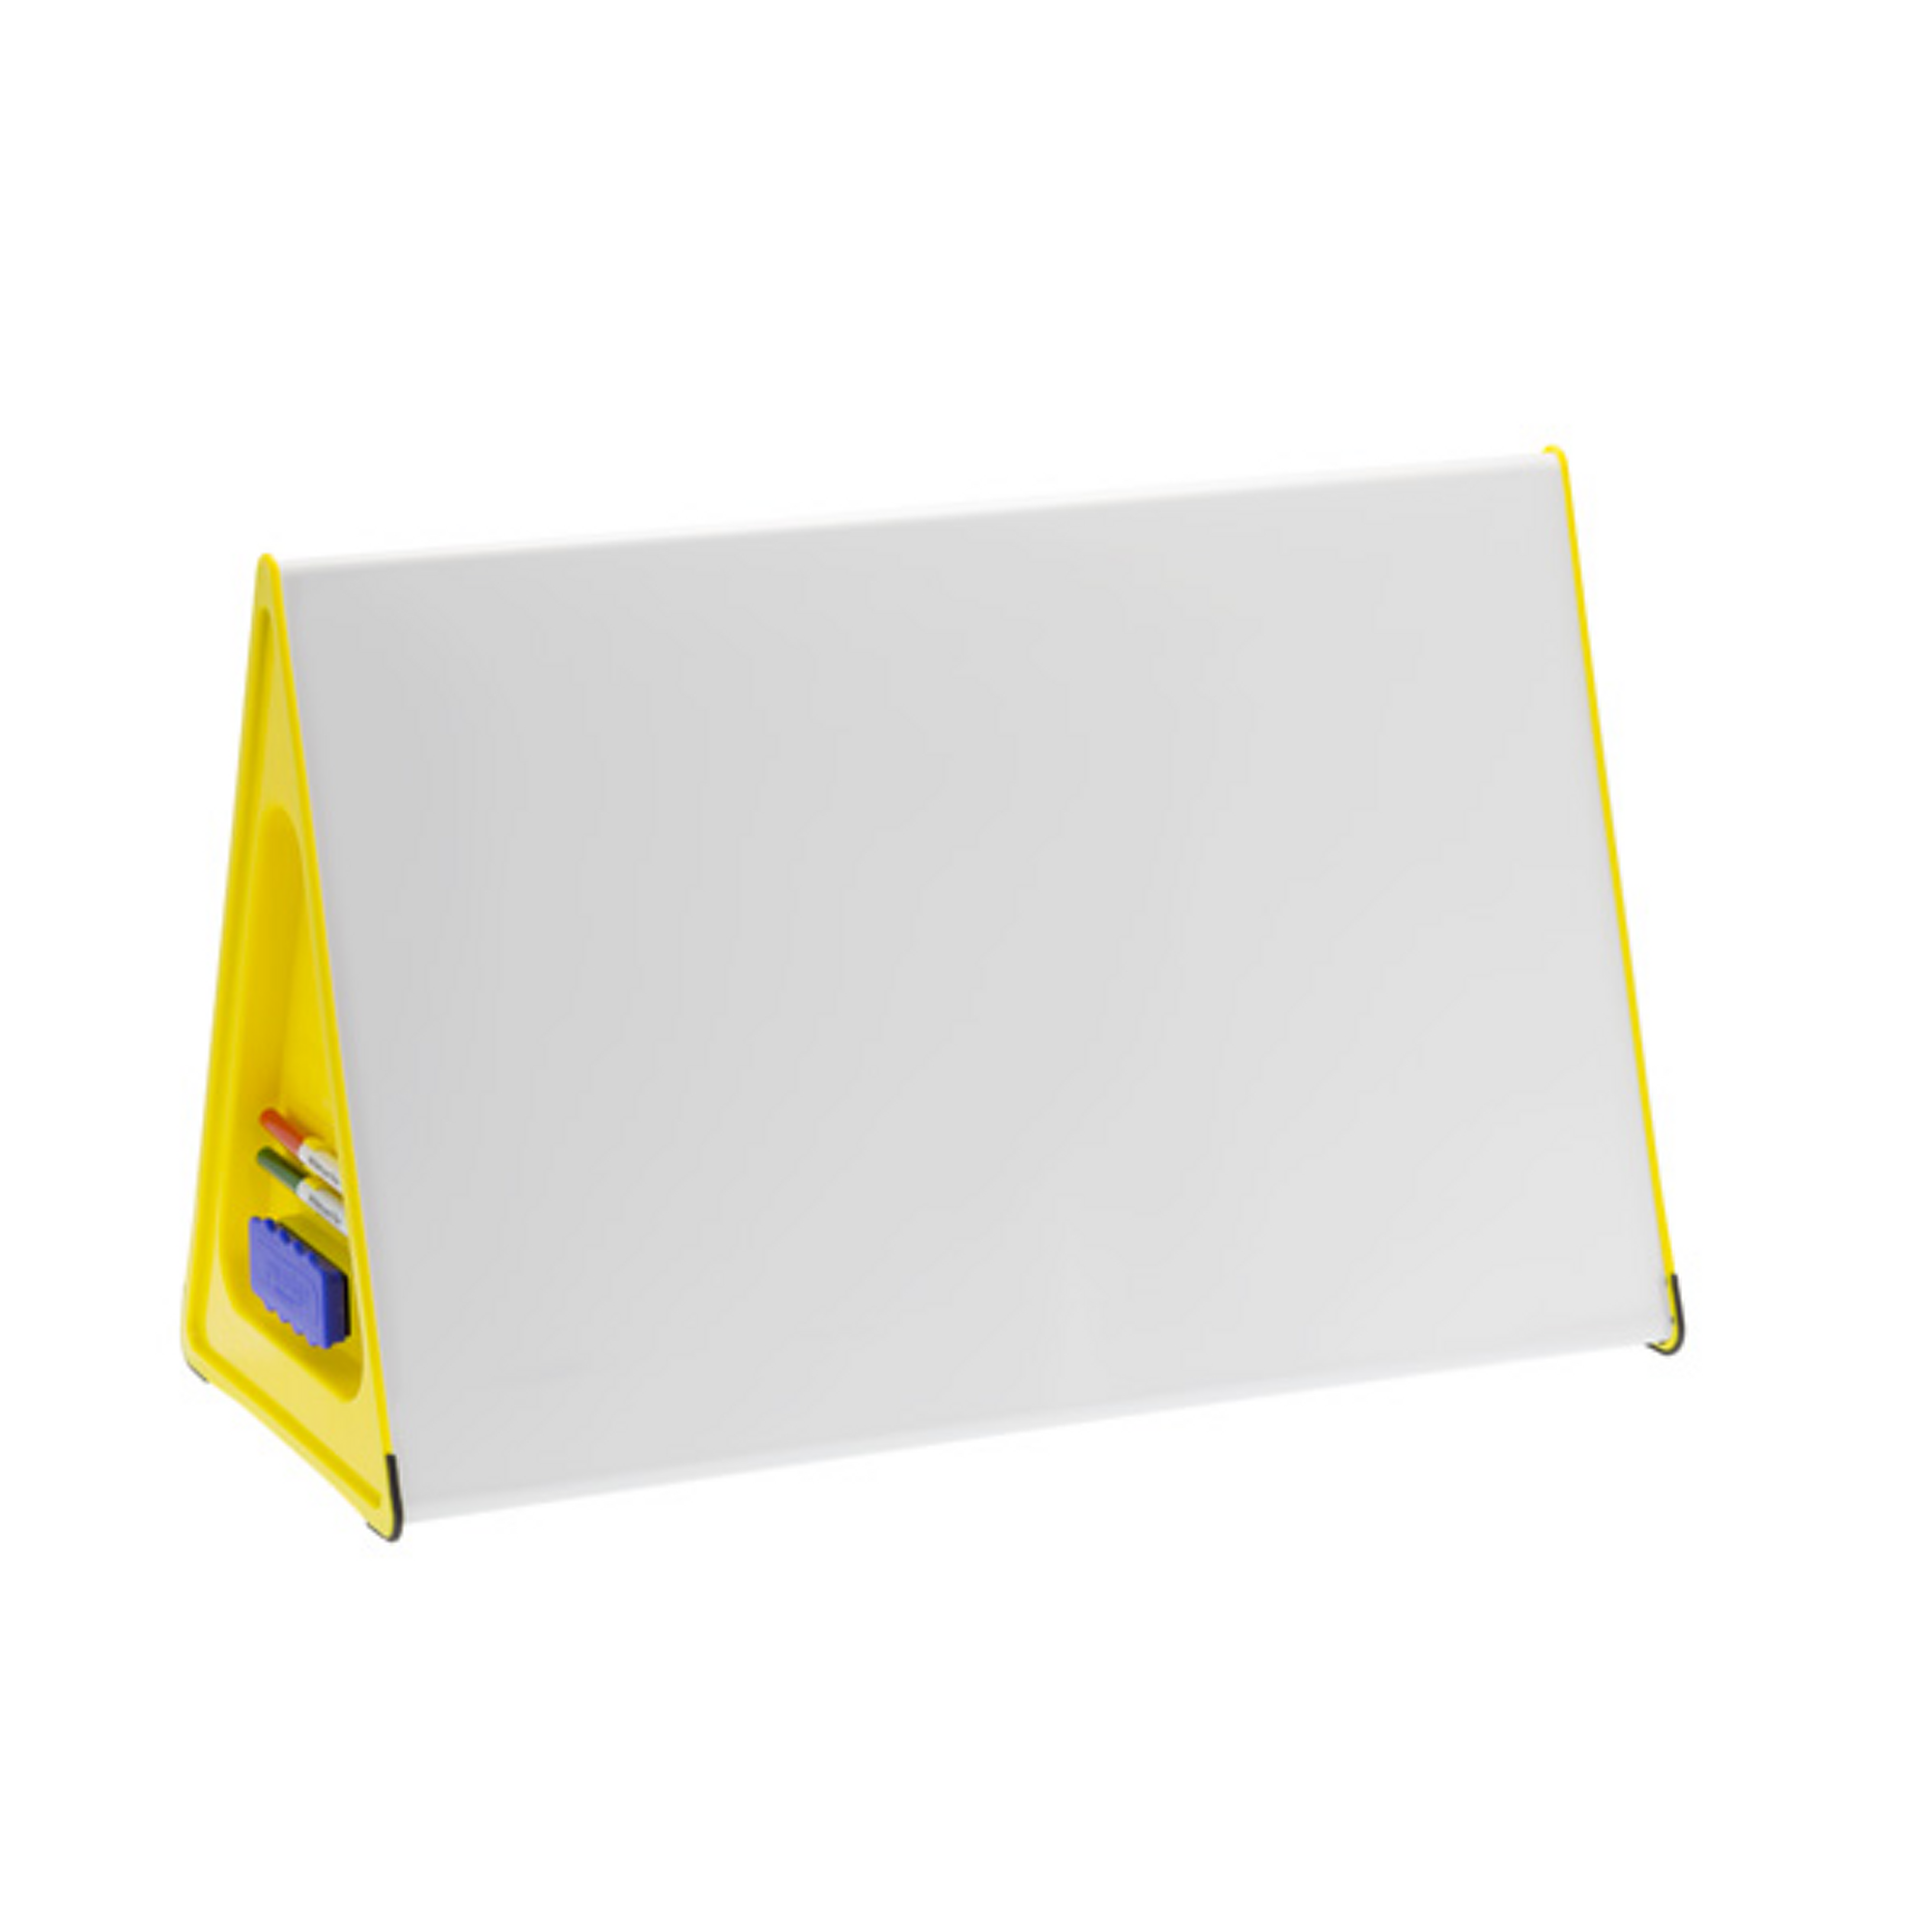 A2 WEDGE WHITEBOARD Dry-Wipe Double Sided Magnetic Portable,Table Top,Display 